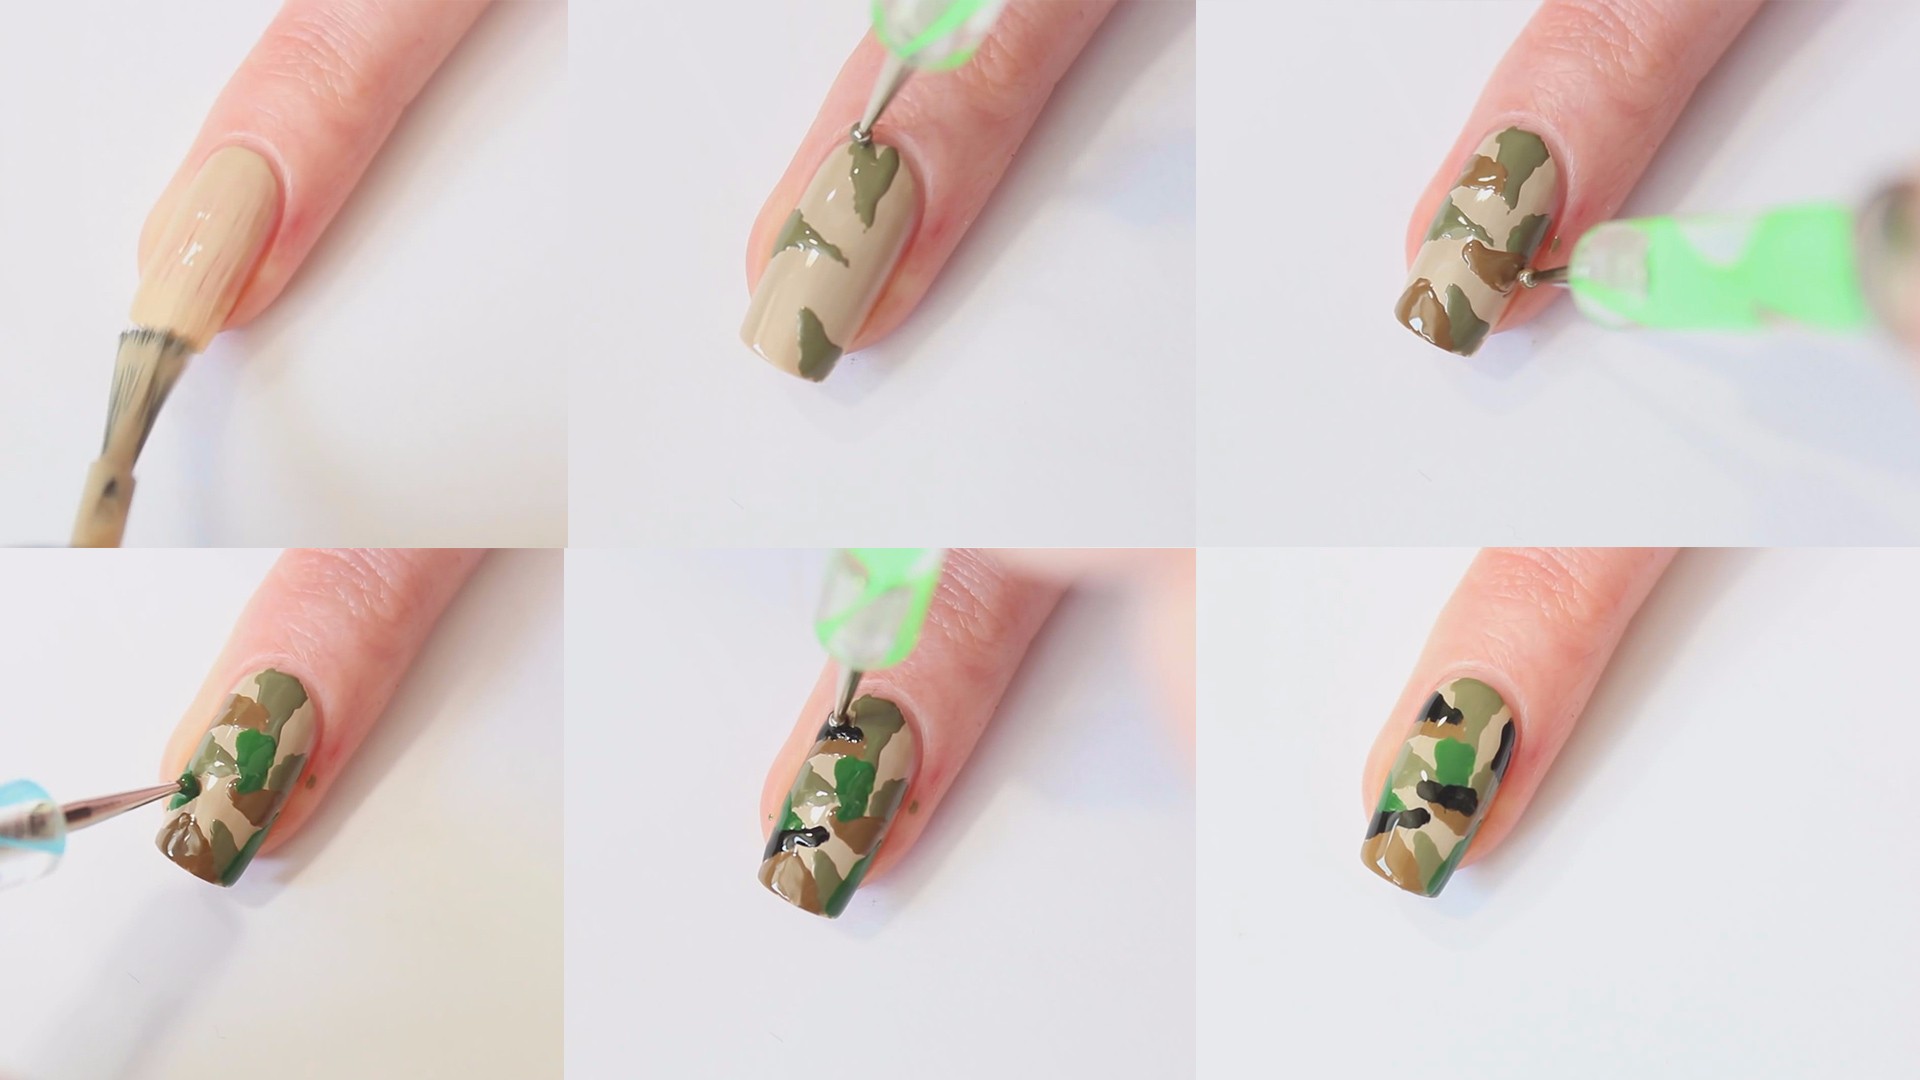 6. Camouflage Nail Art with a Twist: Blue and Glitter - wide 7